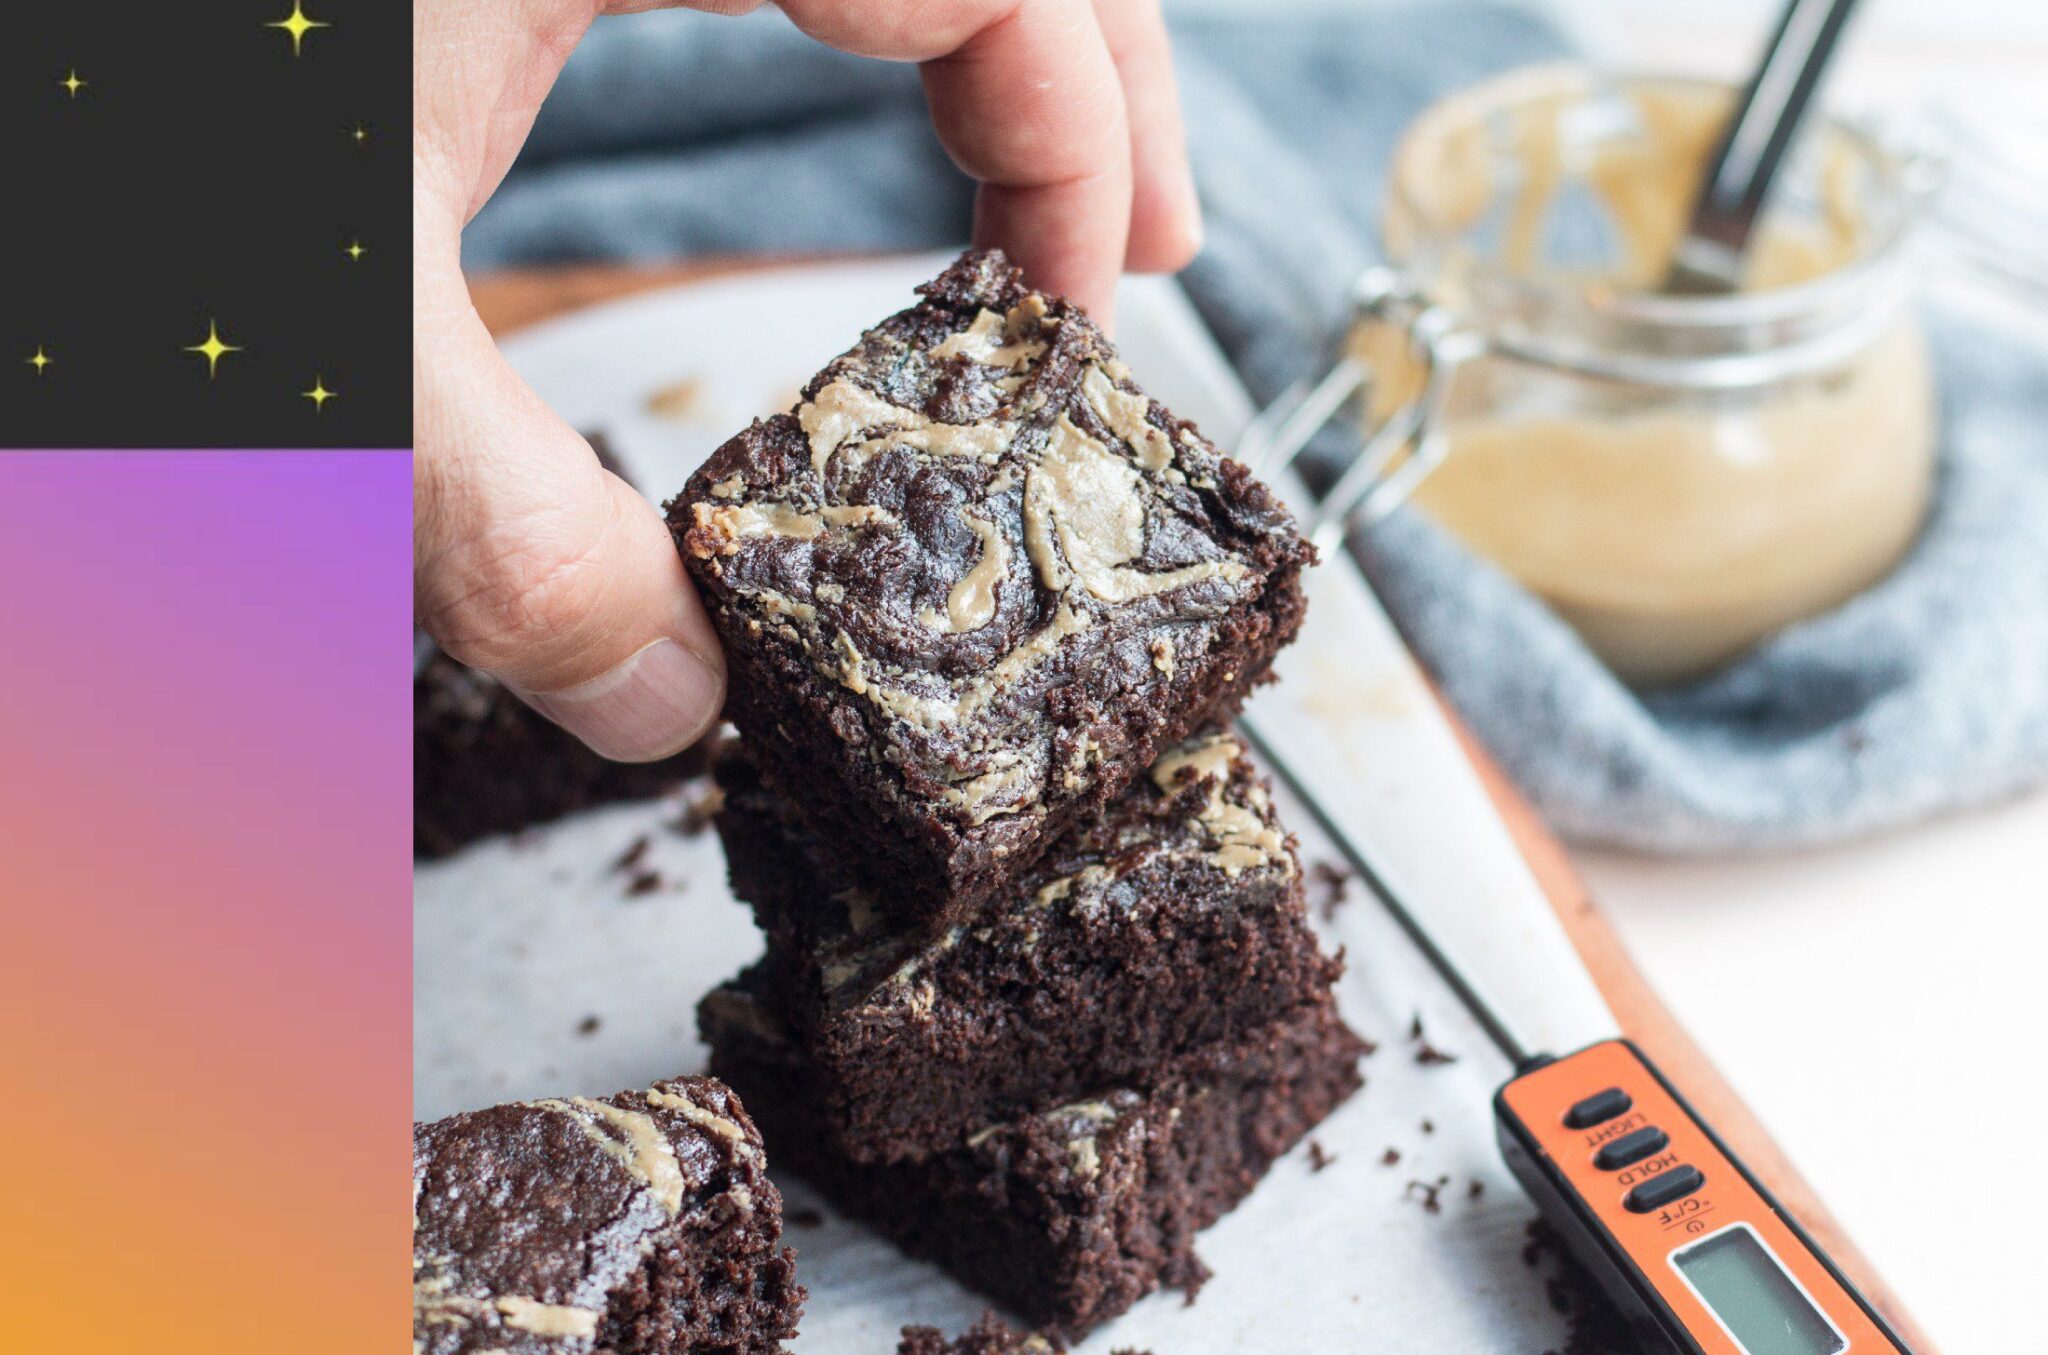 Emjay's Gluten Free Edibles. Photo by ThermoPro on Unsplash